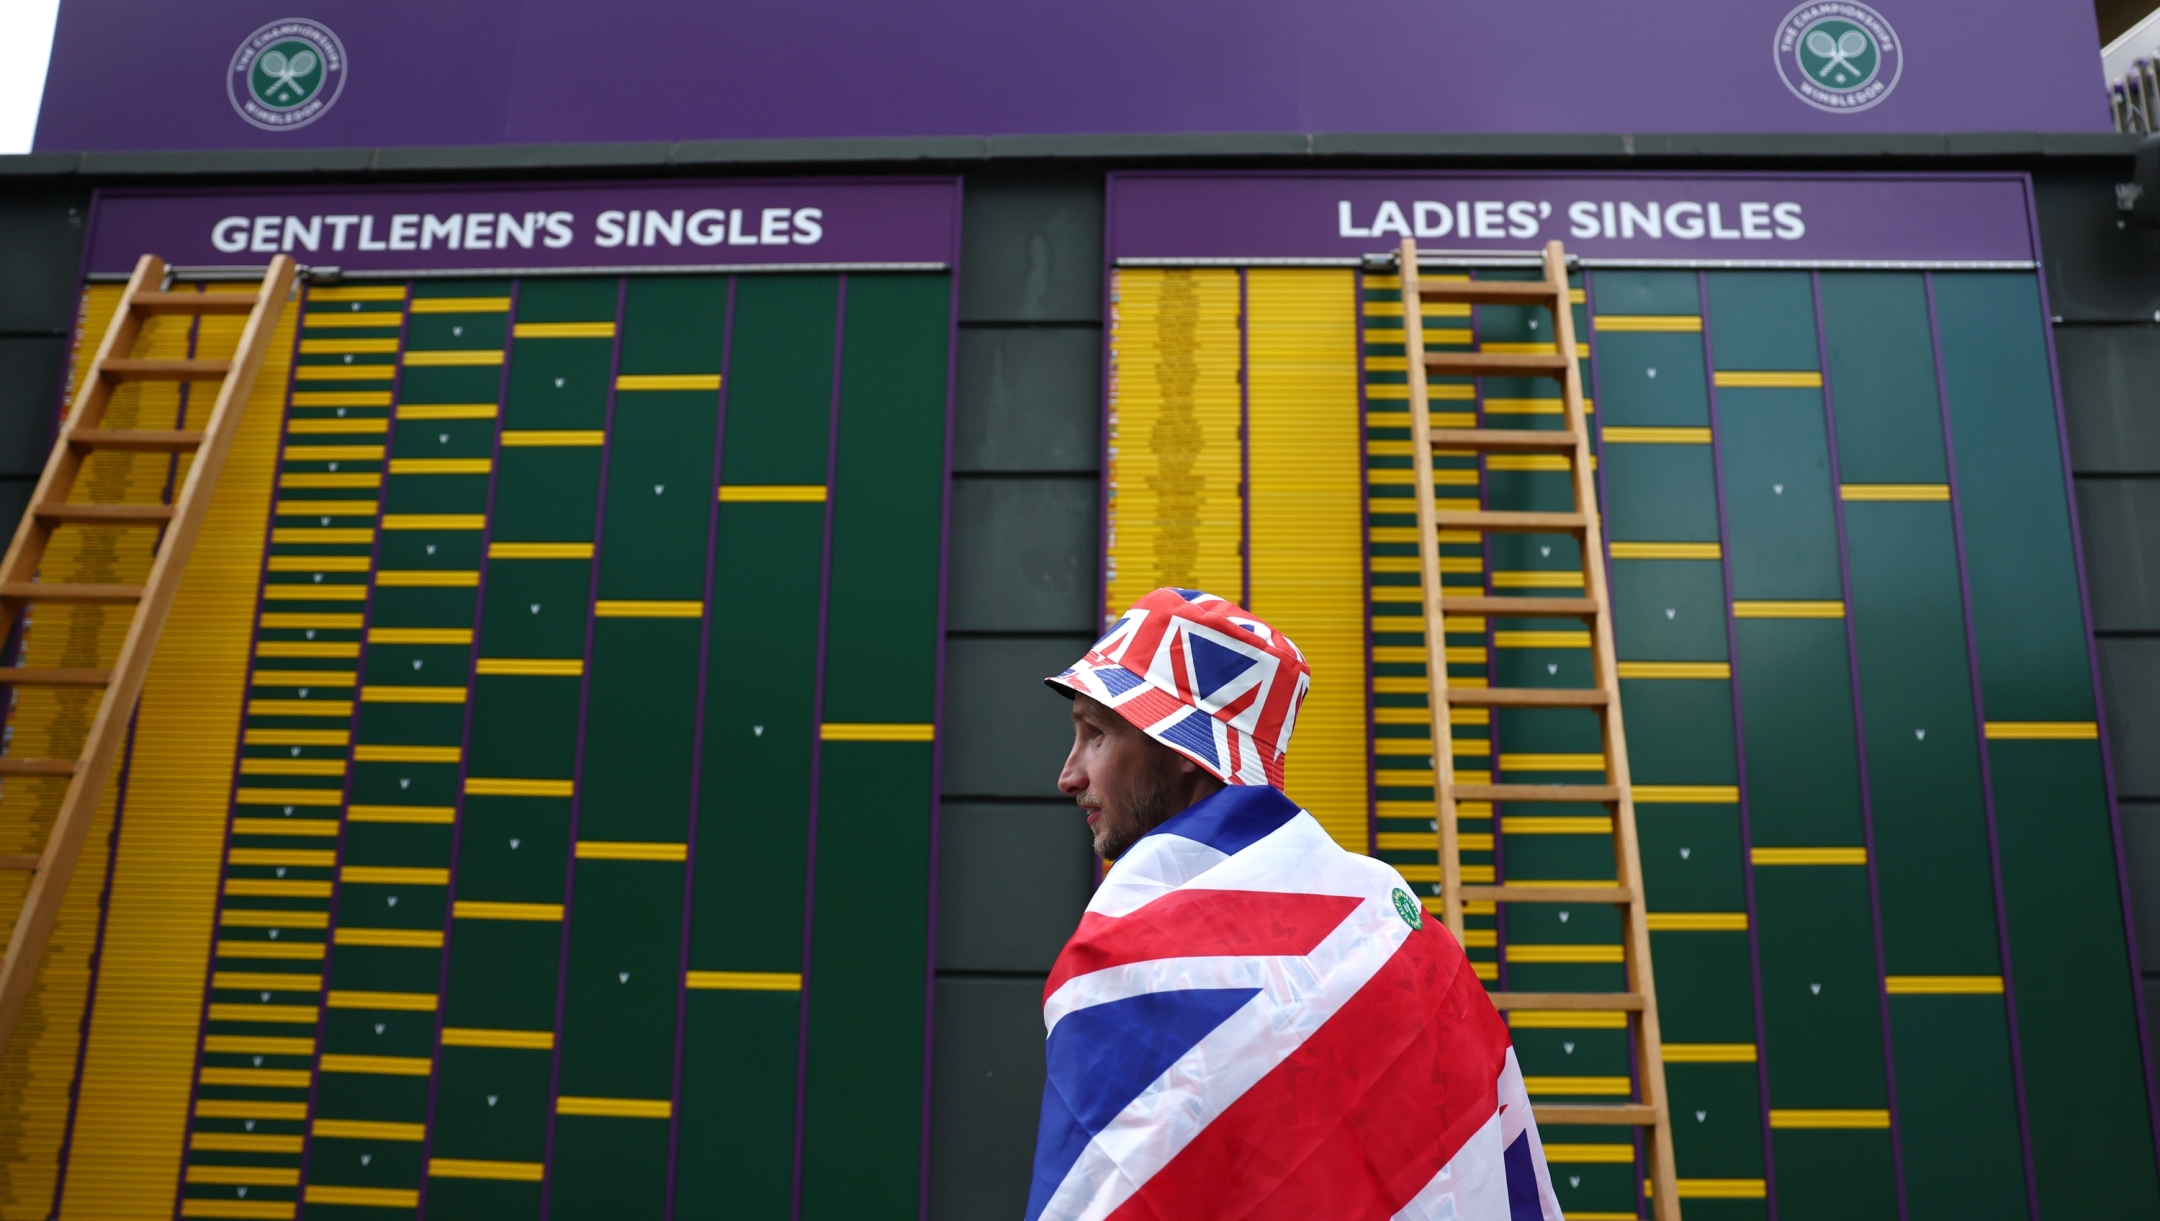 LONDON, ENGLAND - JULY 01: A spectator wearing the Union Flag observes the order of play board during day one of The Championships Wimbledon 2024 at All England Lawn Tennis and Croquet Club on July 01, 2024 in London, England. (Photo by Francois Nel/Getty Images)